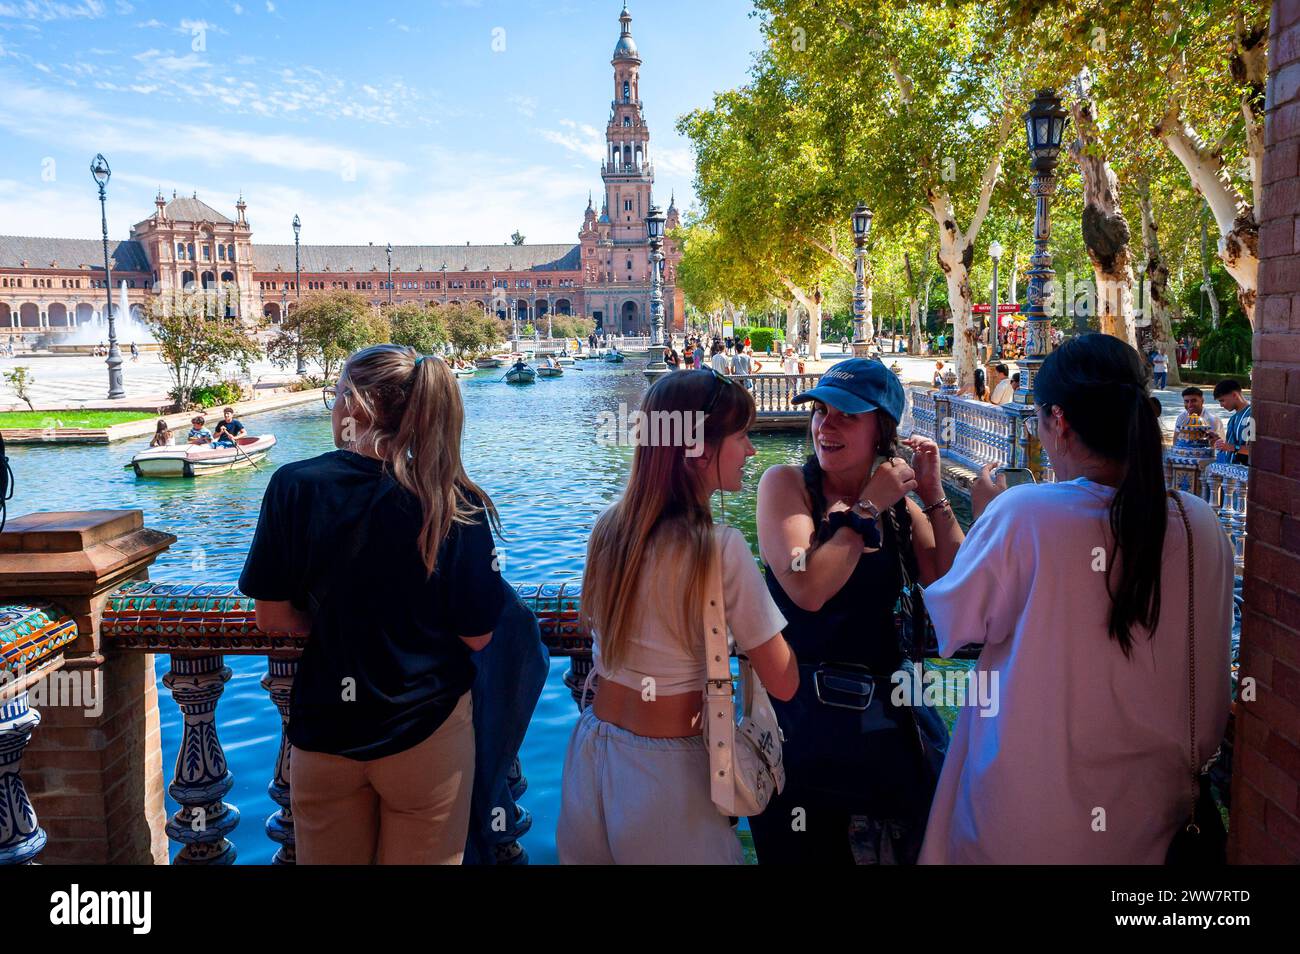 Seville, Spain, Groups of People, Young Tourists, From Behind, Visiting Historic Monument, Parque Maria Luisa, Center City, discussion tourism Stock Photo